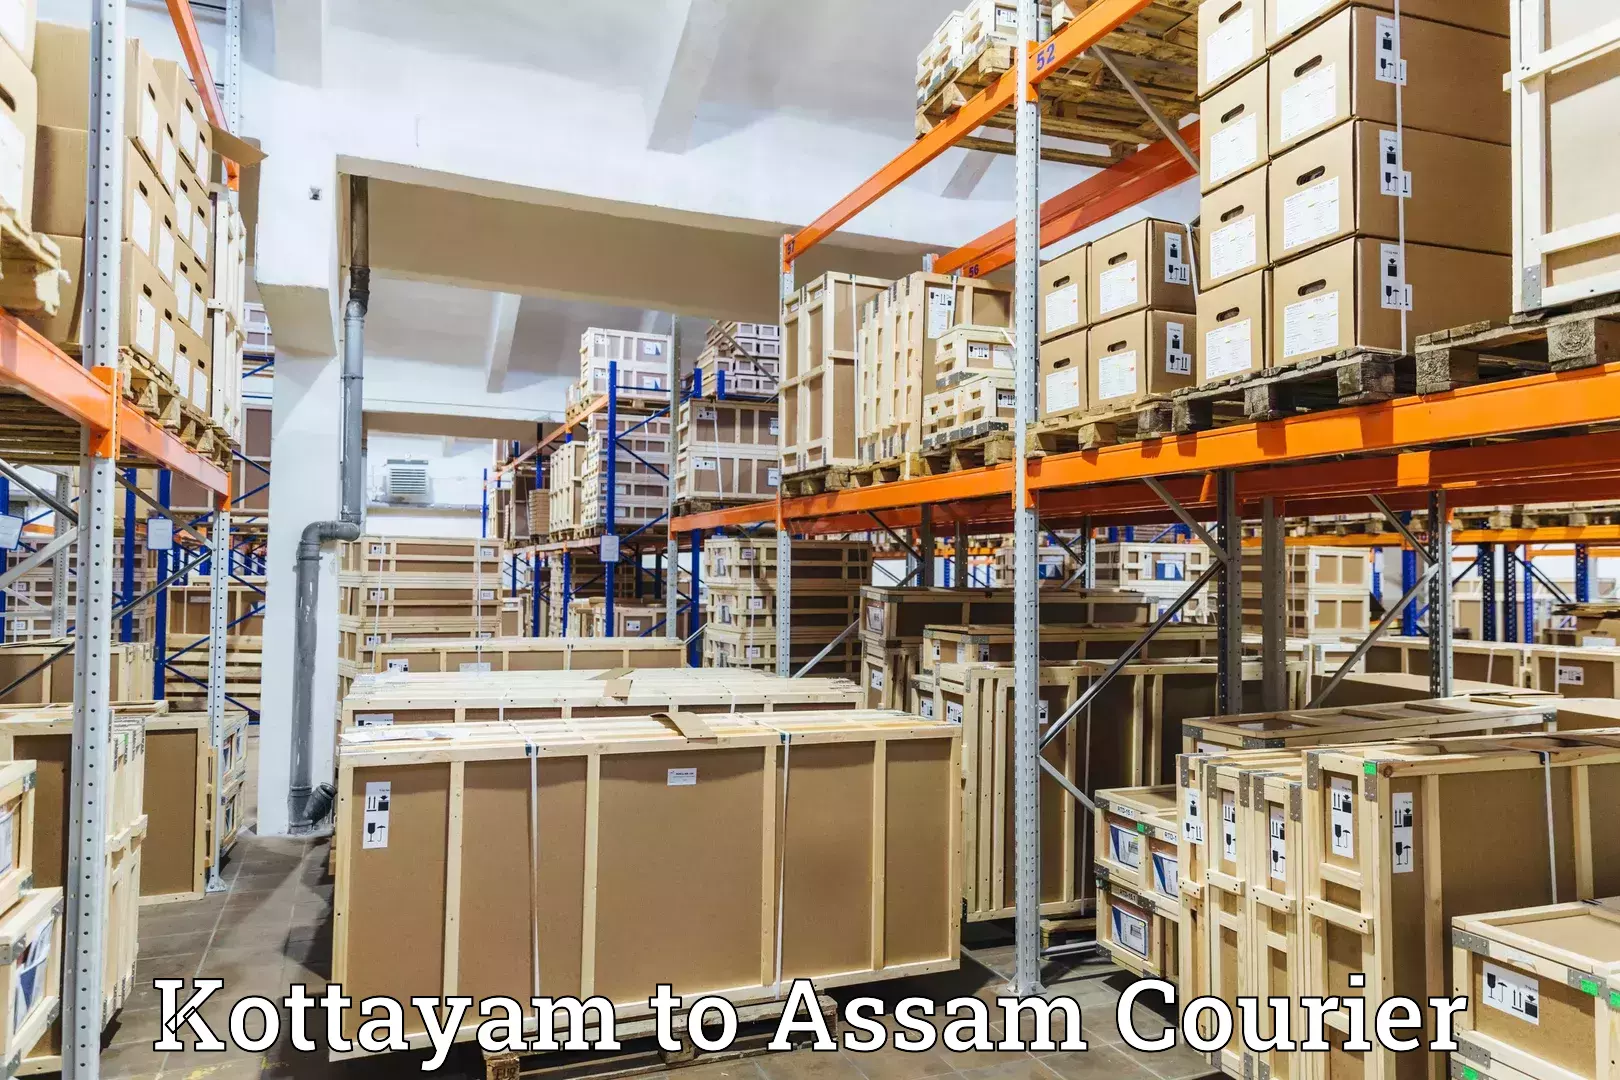 Online package tracking Kottayam to Assam